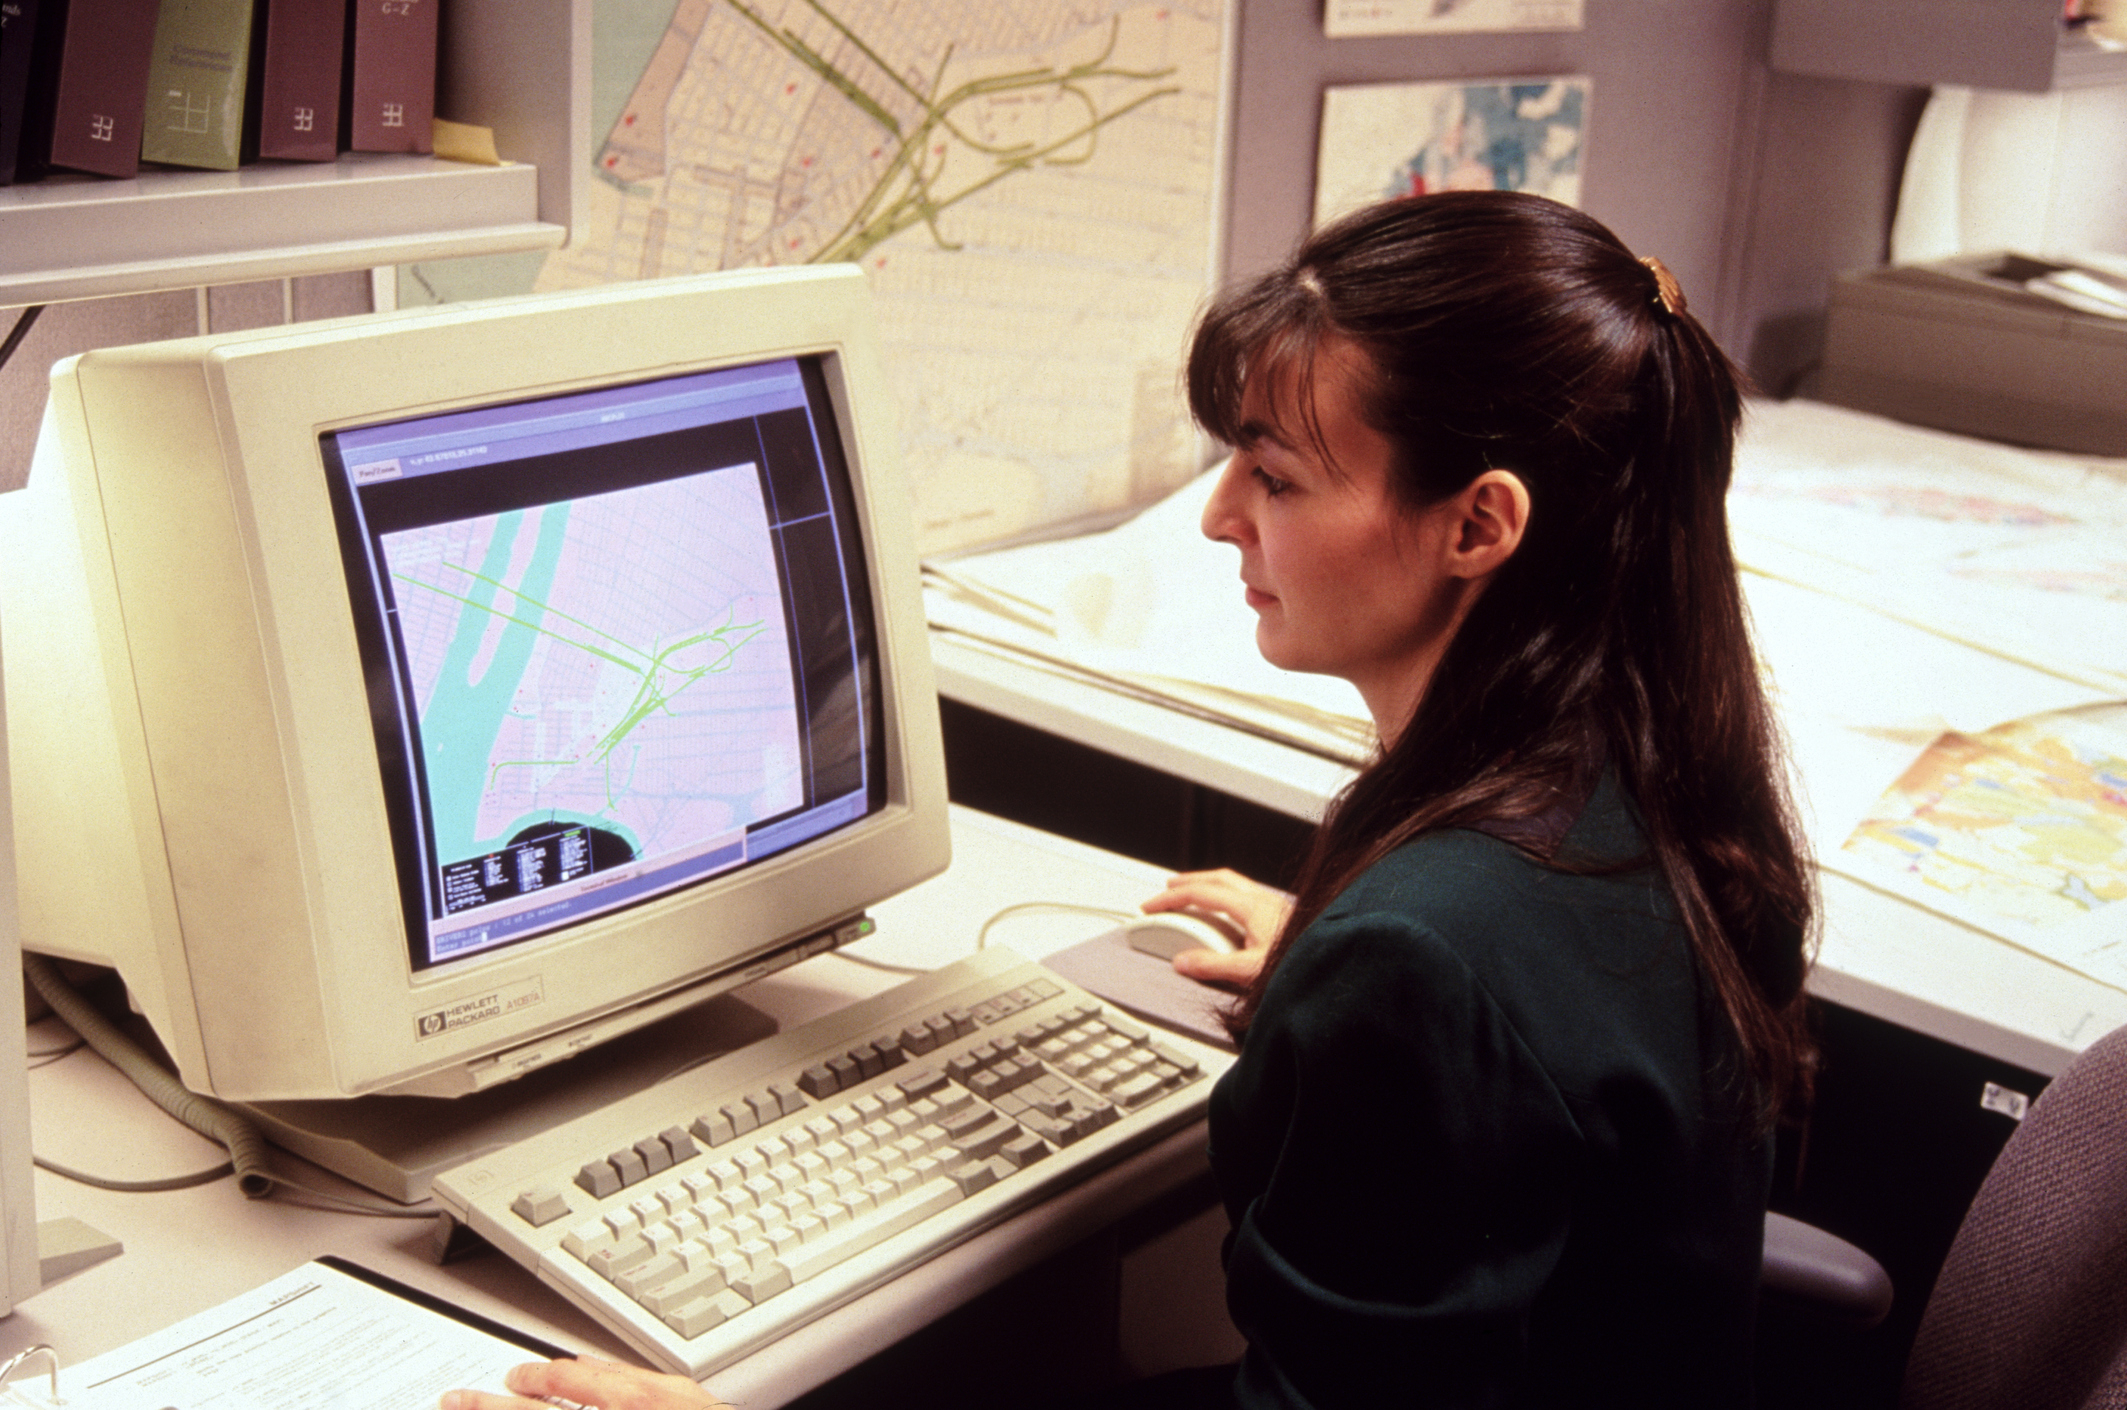 A woman is doing work on a retro computer